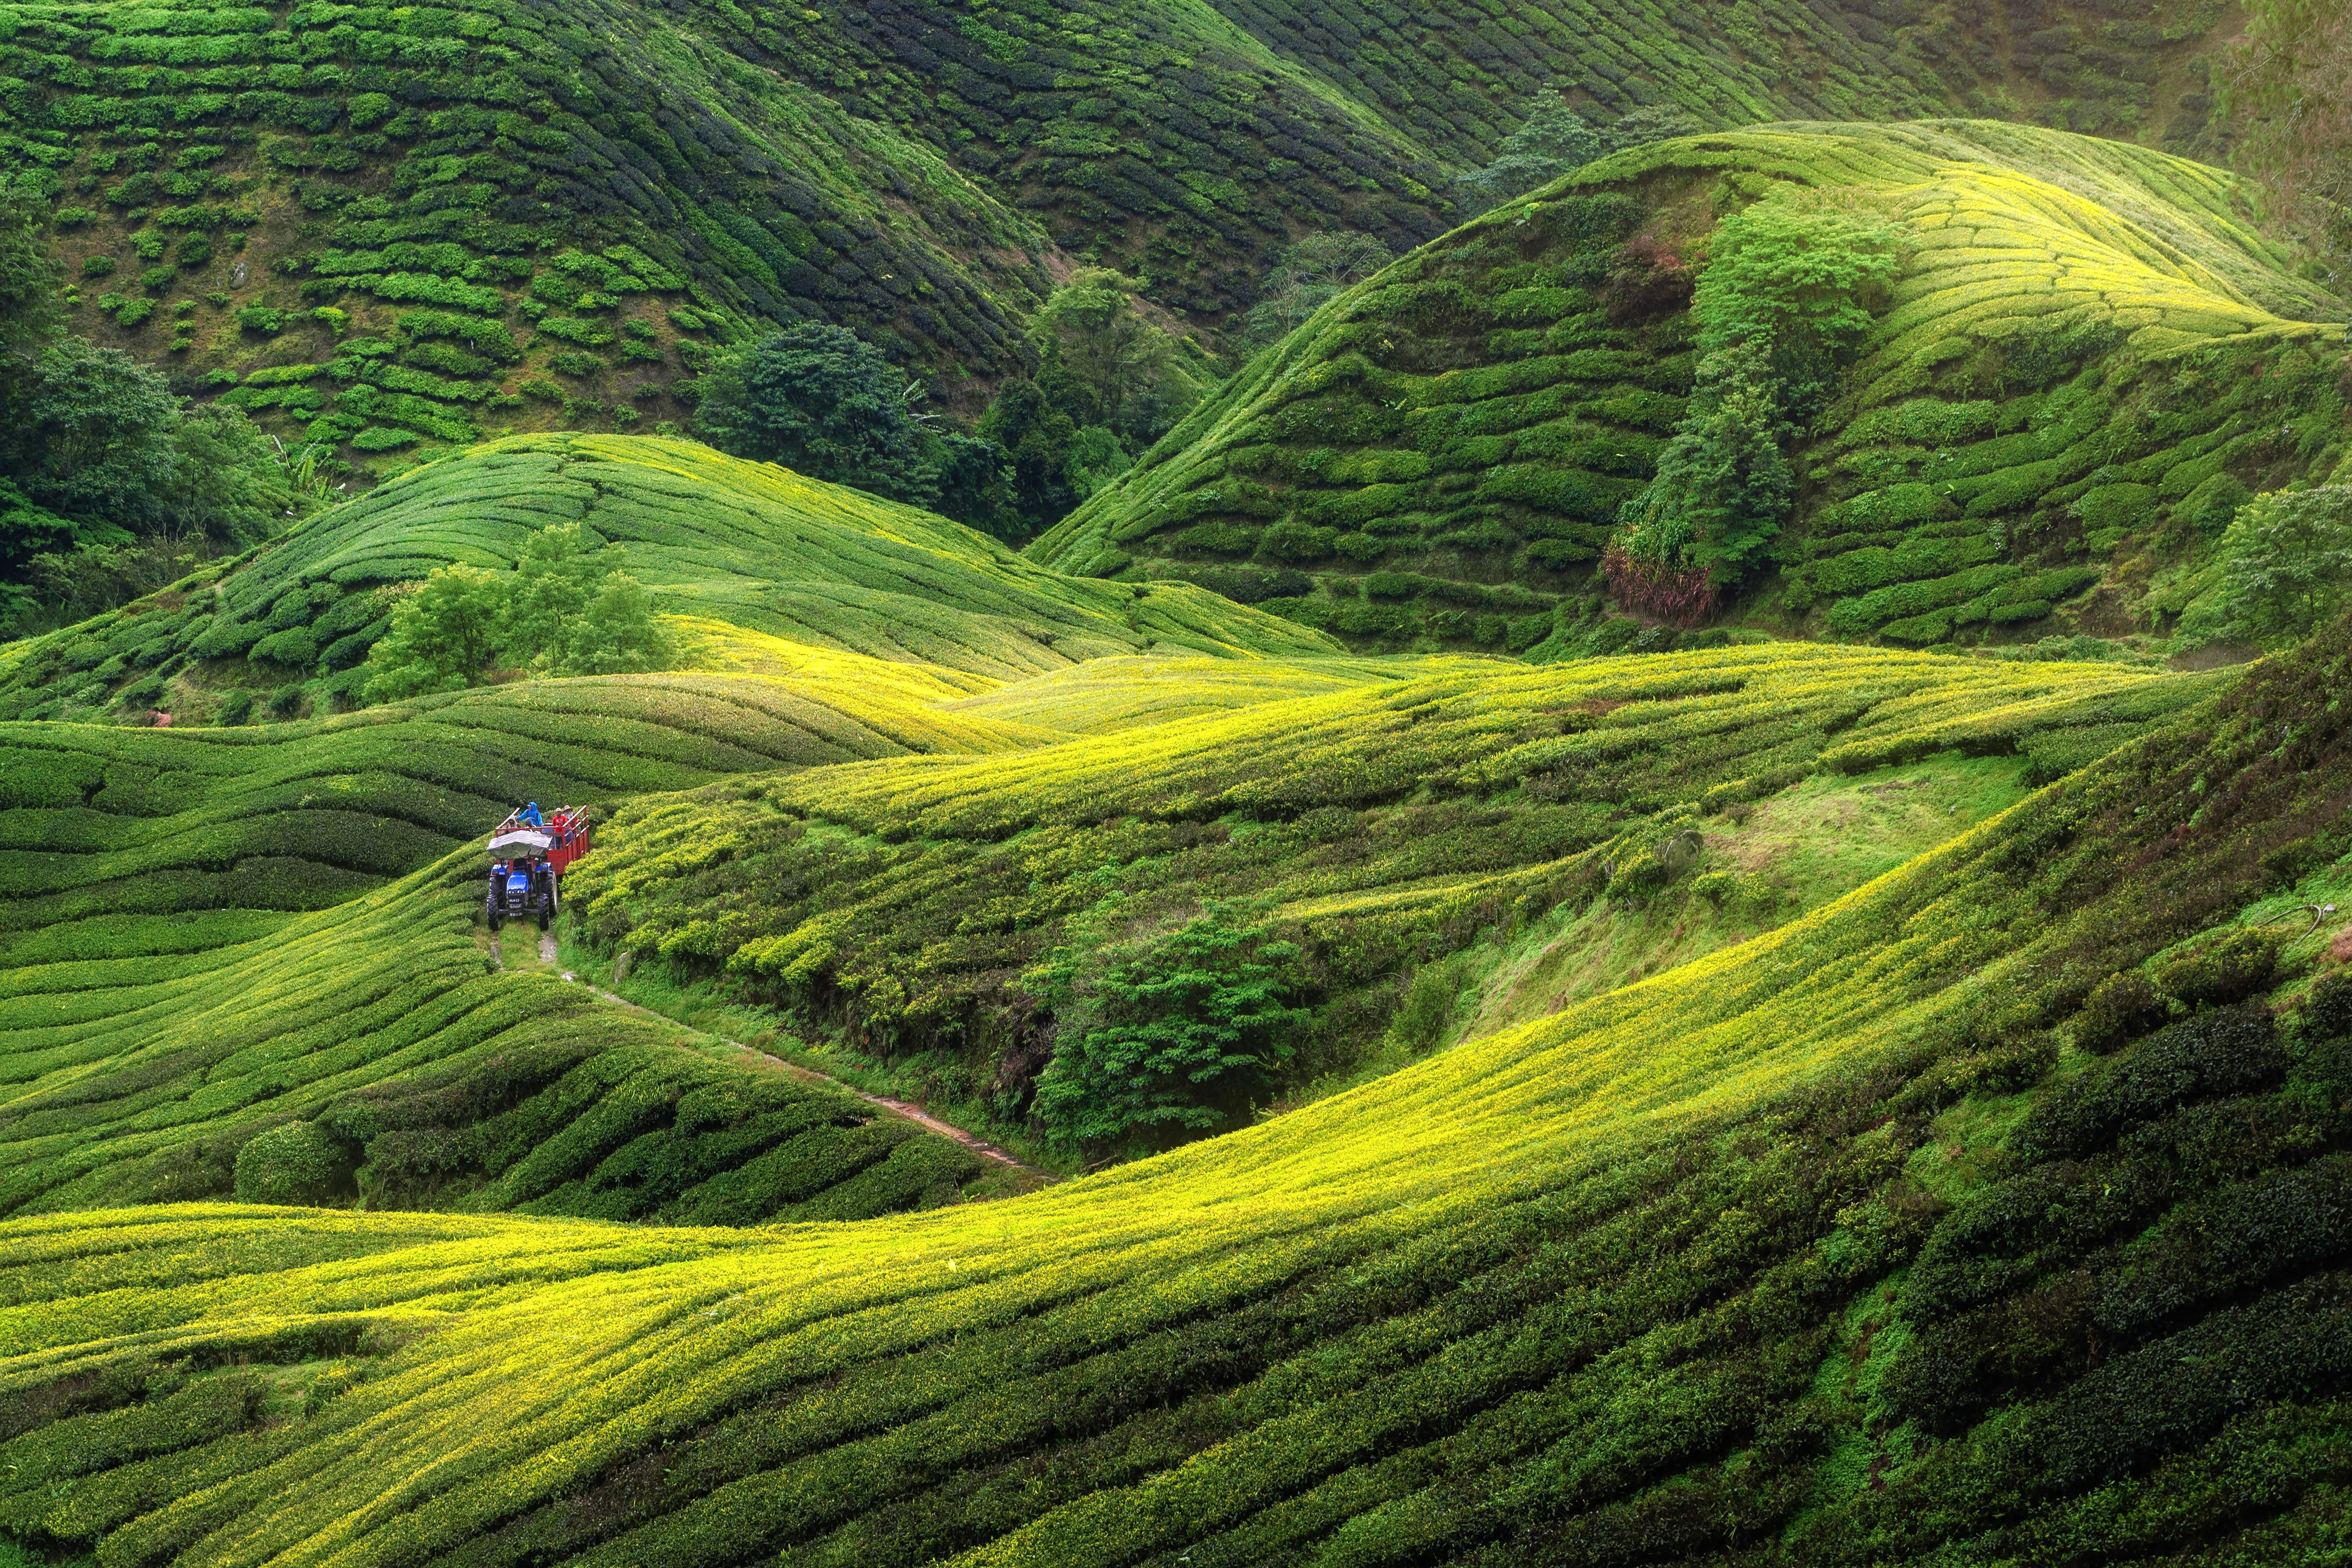 It’s hard to pick just one beautiful spot in geographically diverse Malaysia, but the Cameron Highlands might be the winner. Located in the state of Pahang, the 275-square-mile region is home to the largest tea plantations in the country—a place of fuzzy green hills rolling into the distance, where you can also explore butterfly gardens and strawberry farms.<p>Sign up to receive the latest news, expert tips, and inspiration on all things travel</p><a href="https://www.cntraveler.com/newsletter/the-daily?sourceCode=msnsend">Inspire Me</a>